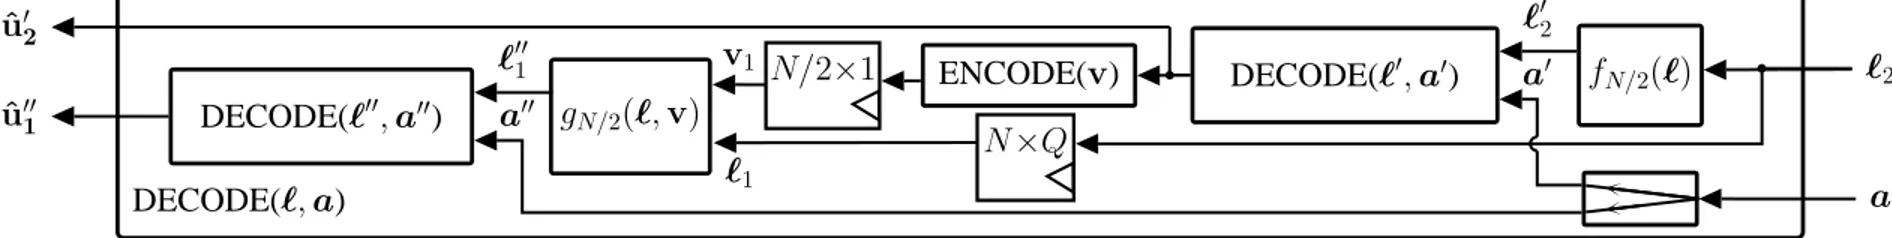 Figure 4.5: Recursive architecture of pipelined polar decoders for block length N